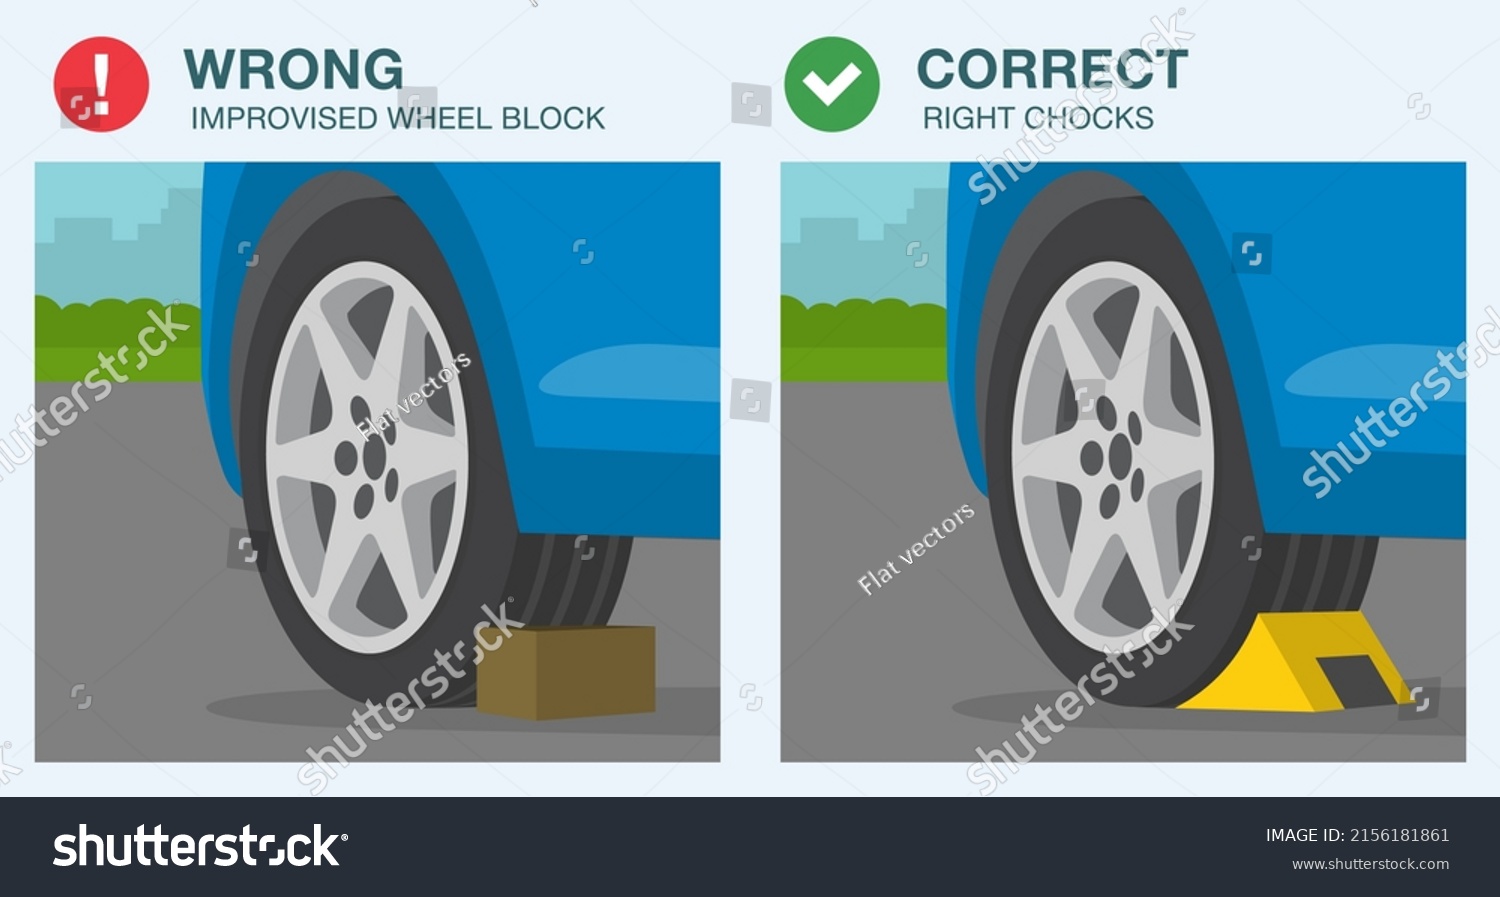 SVG of Driving rules and tips. Close-up view of wheel stopper or chocks. Correct and incorrect wheel block types. Flat vector illustration template. svg